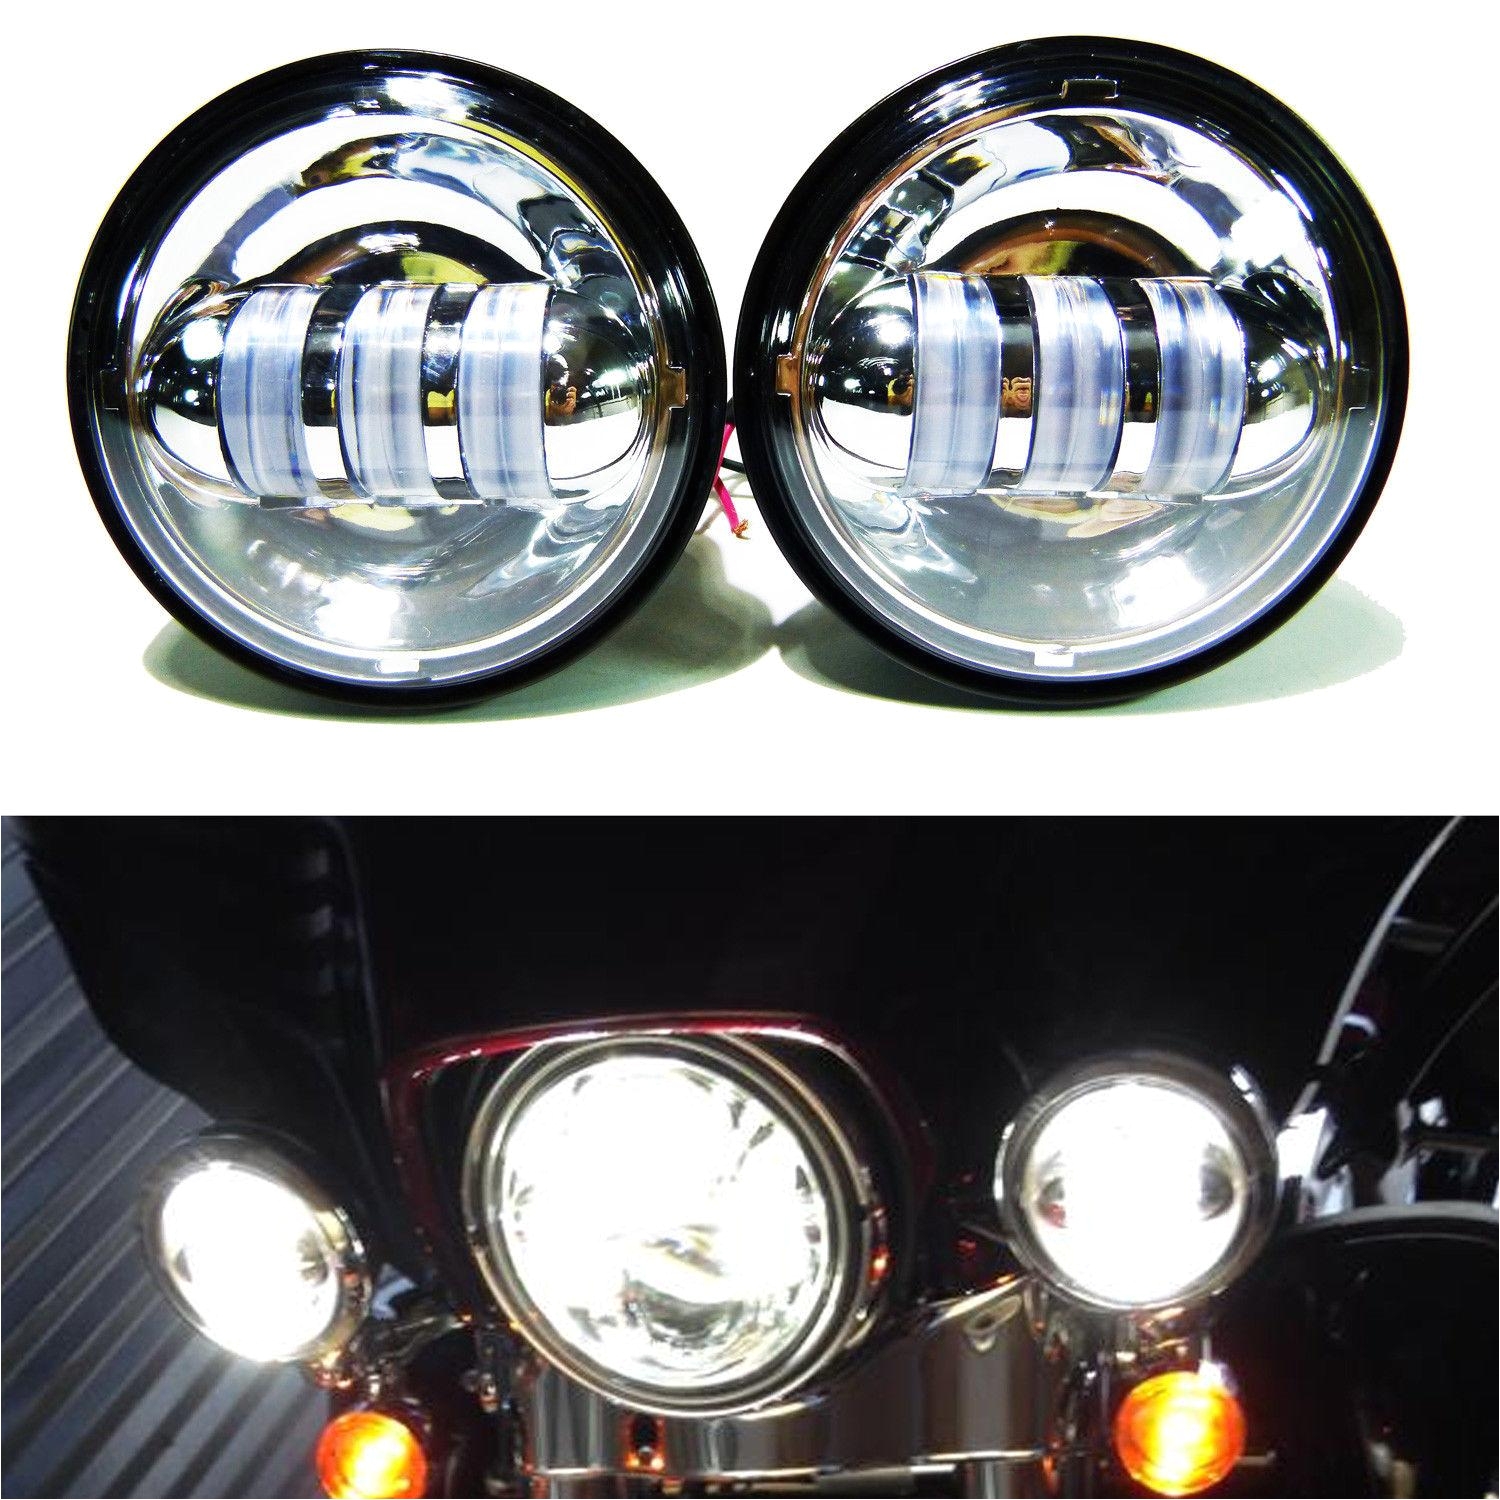 4 1 2 chrome led auxiliary spot fog passing light lamp bulb motorcycle daymaker projector spot driving lamp for harley motorcycle fog lamp harley motorcycle